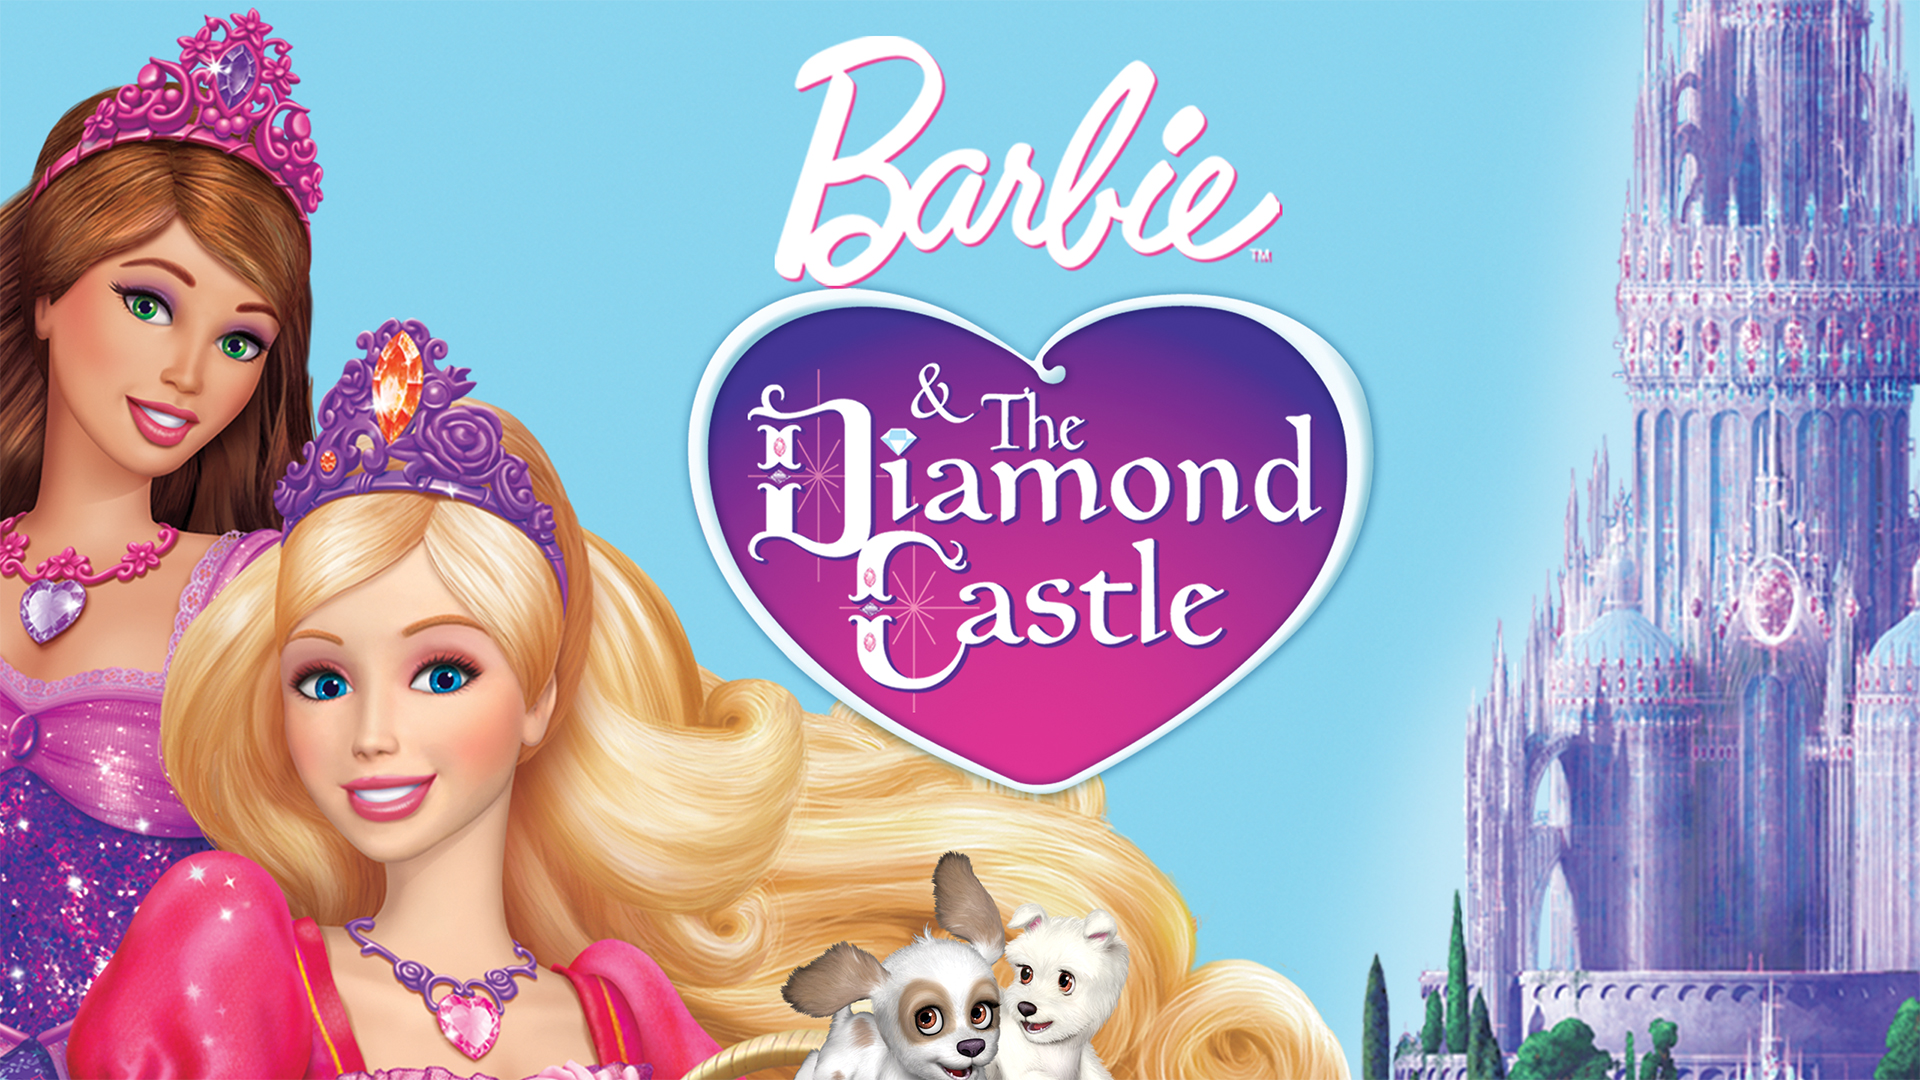 Watch Barbie and the Diamond Castle Online with NEON